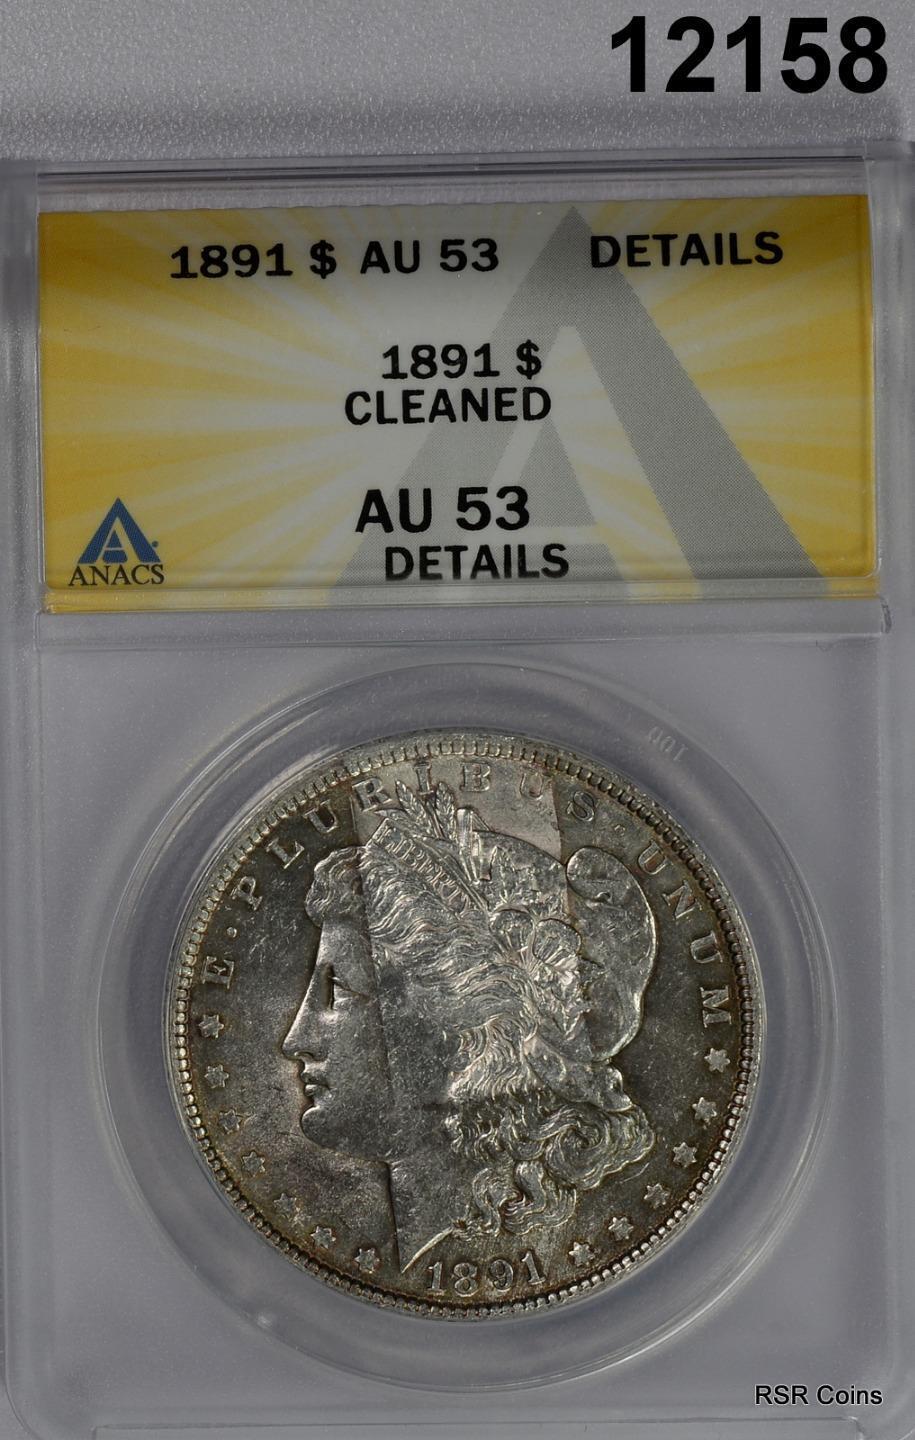 1891 MORGAN SILVER DOLLAR ANACS CERTIFIED AU53 CLEANED #12158